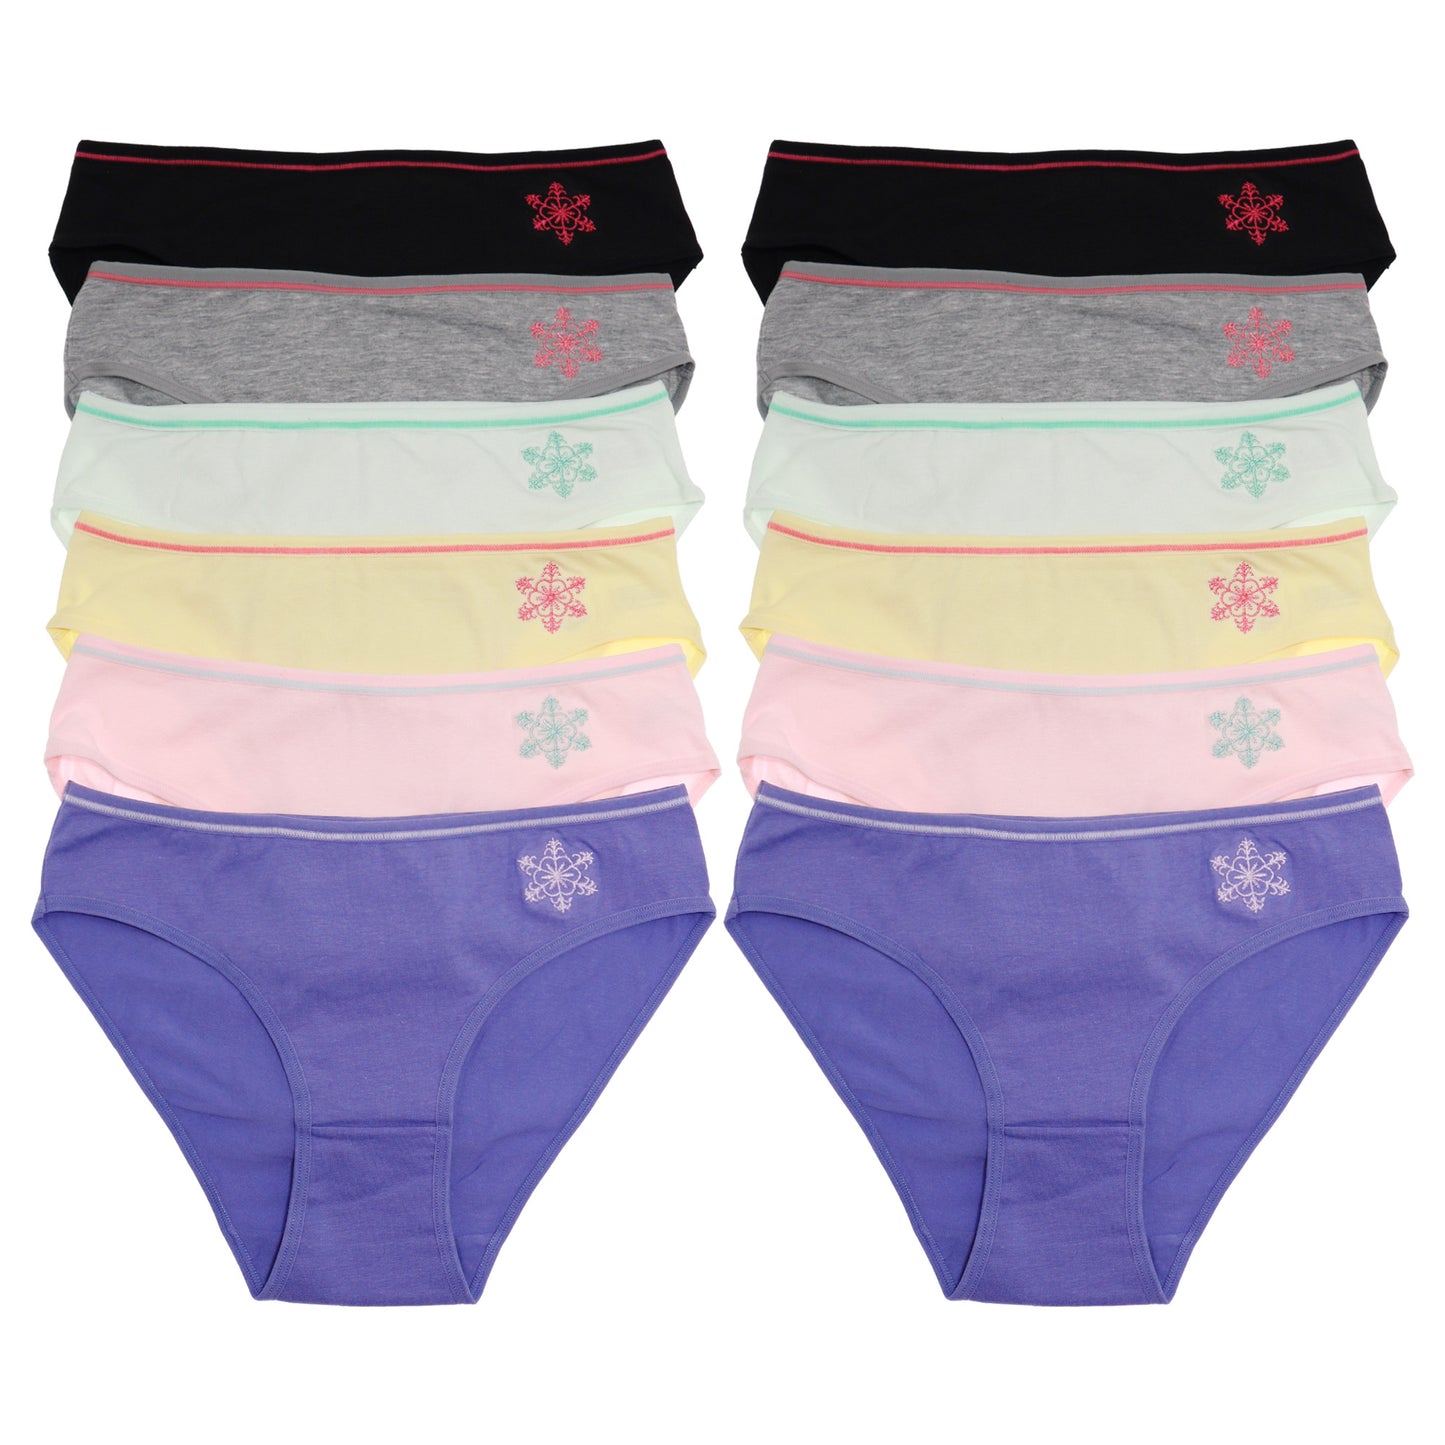 Cotton Bikini Panties with Embroidered Flower (6-Pack)